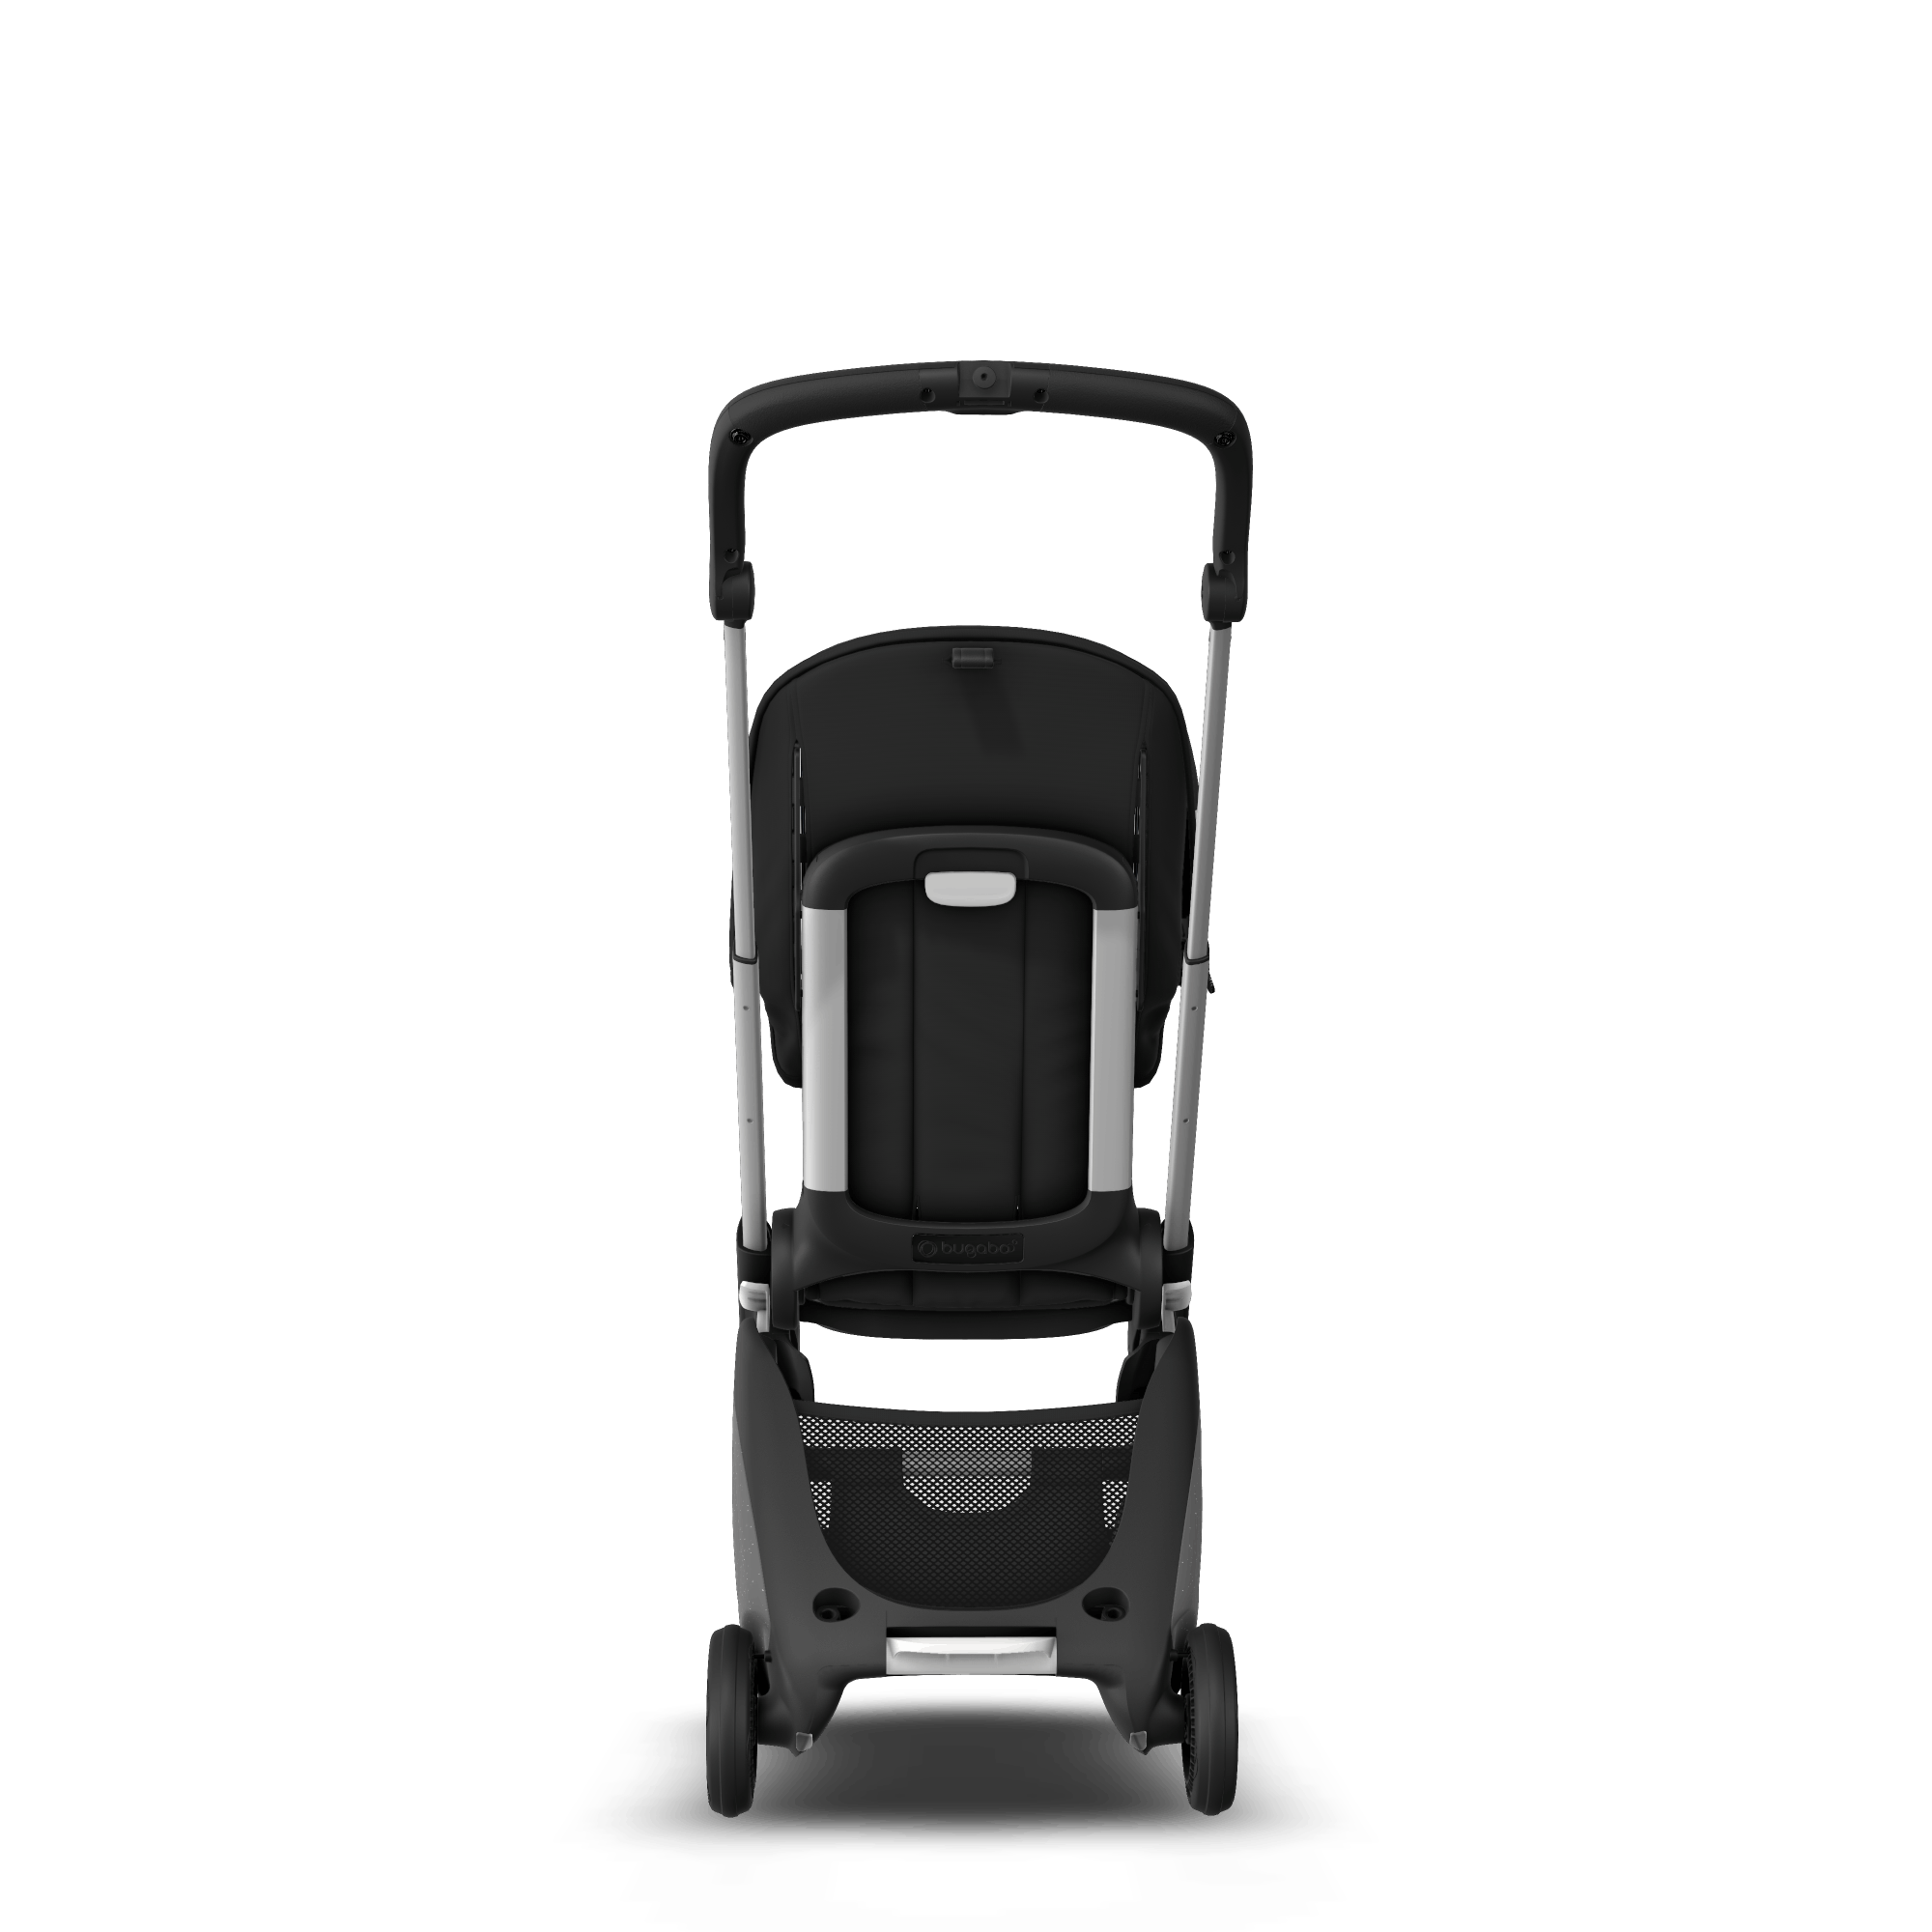 very compact stroller